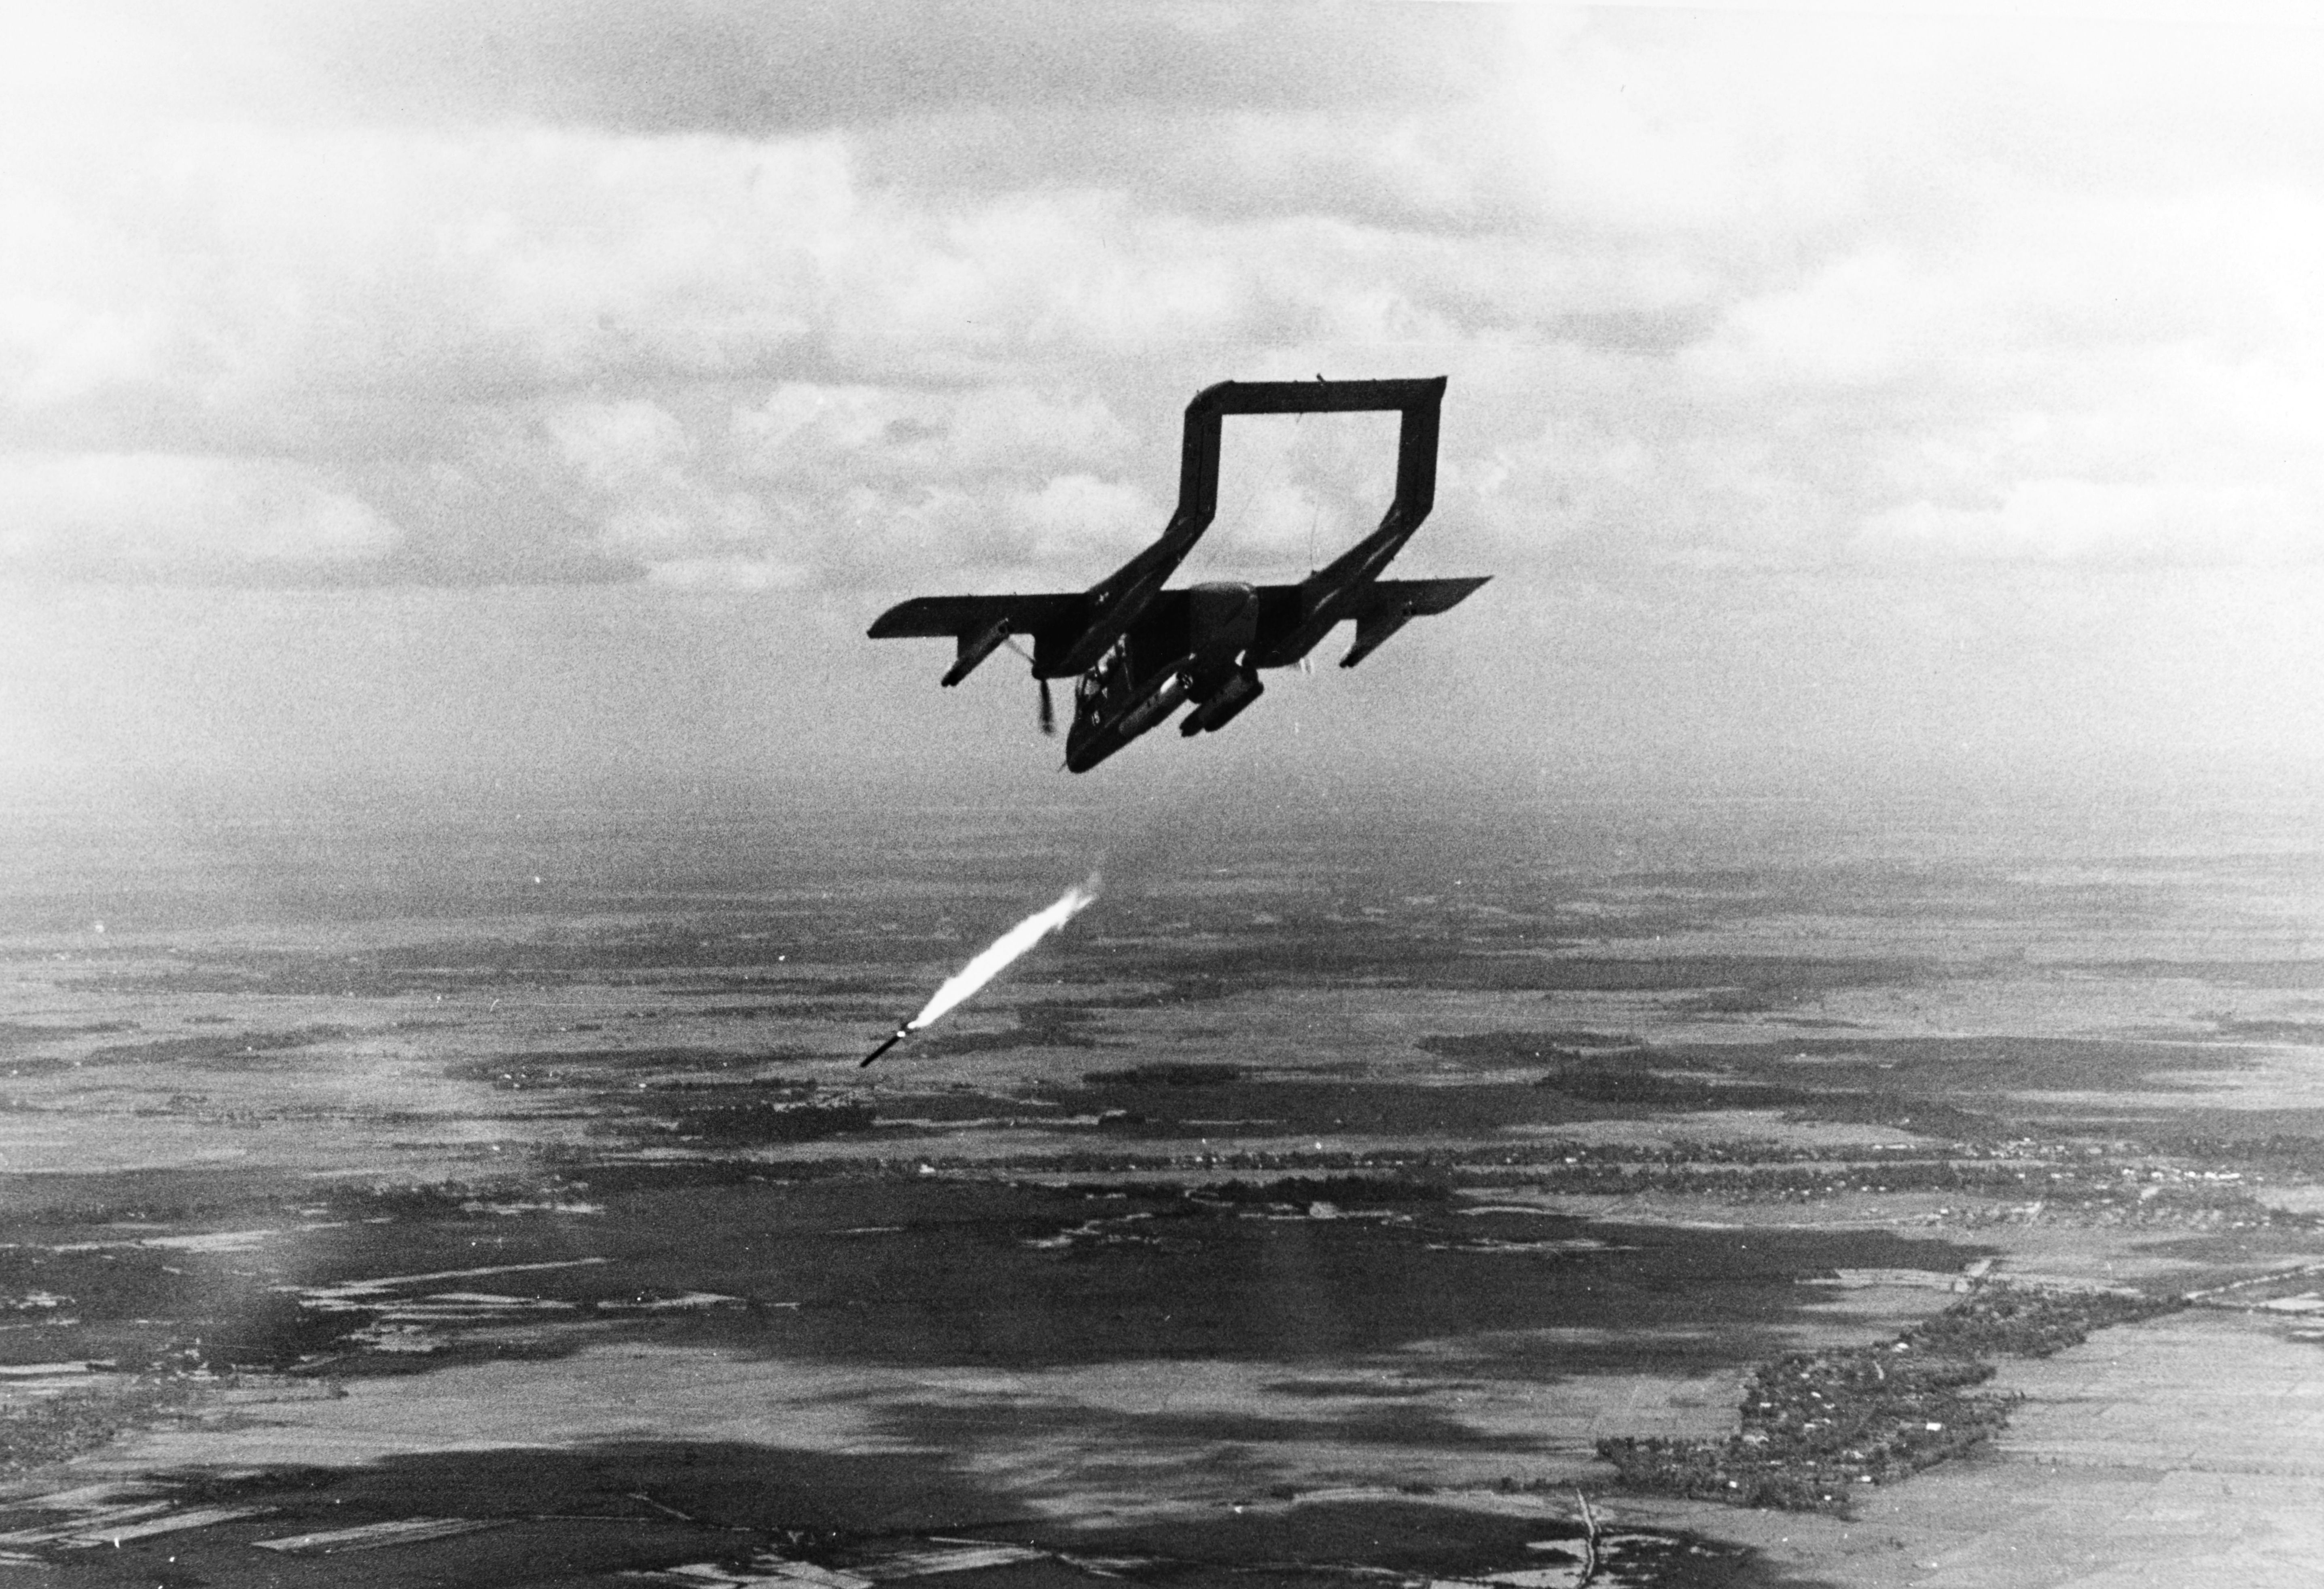 A black and white photo of an OV-10A attacking a target in Vietnam.